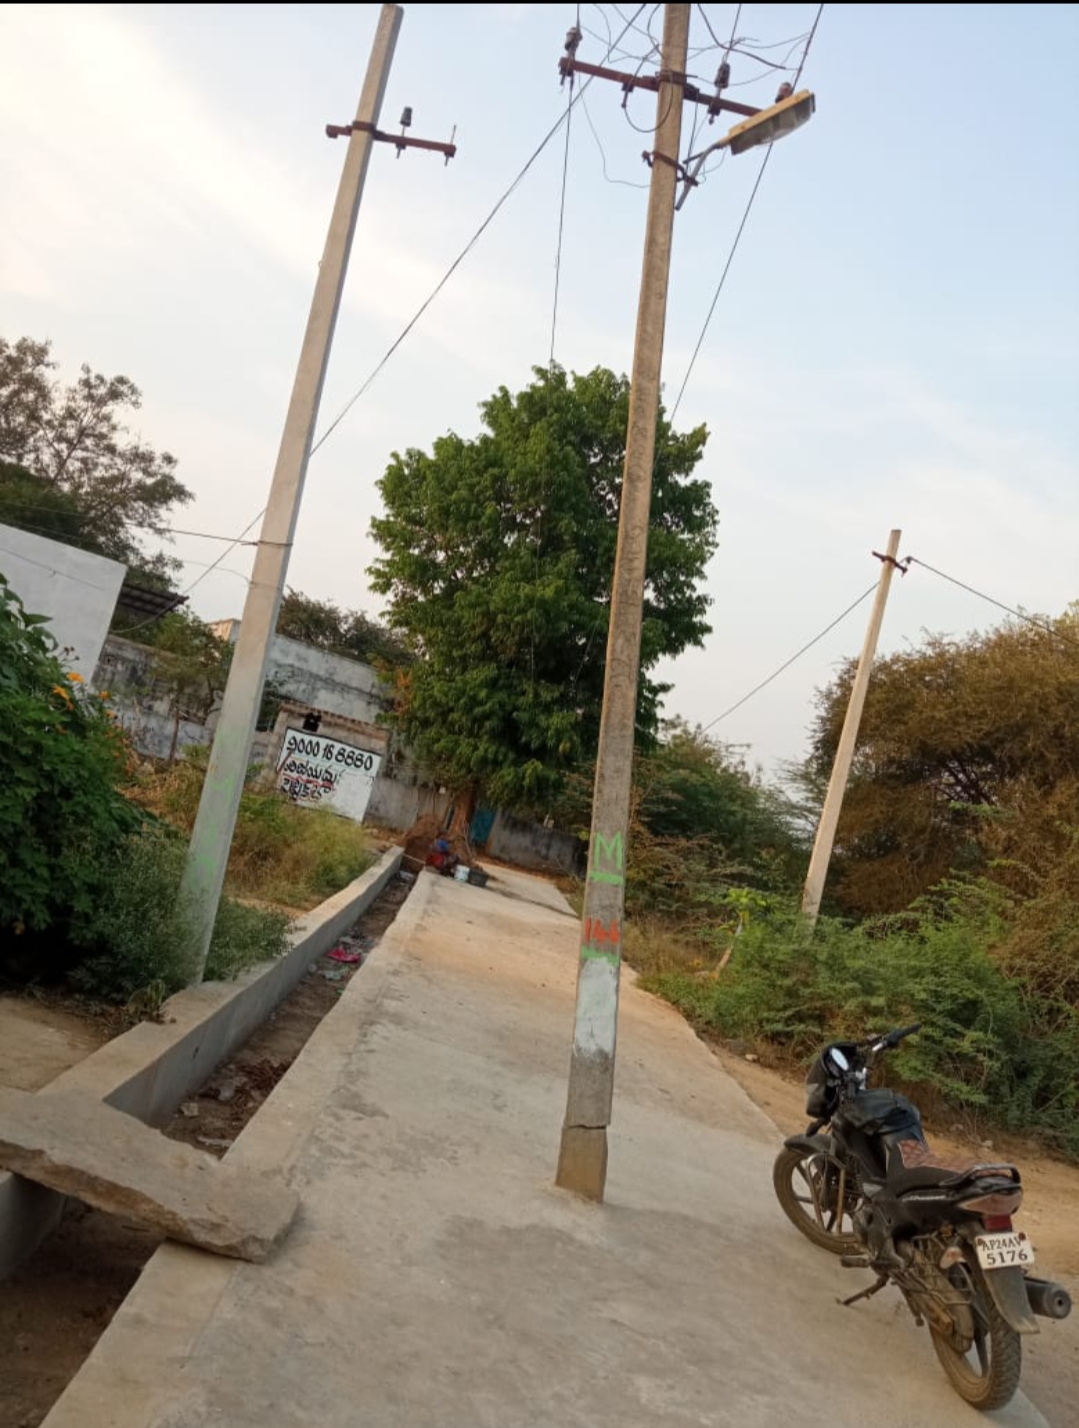  Current Pole Ready To Collapse - Imminent Danger - Ignored By Power Officials, P-TeluguStop.com